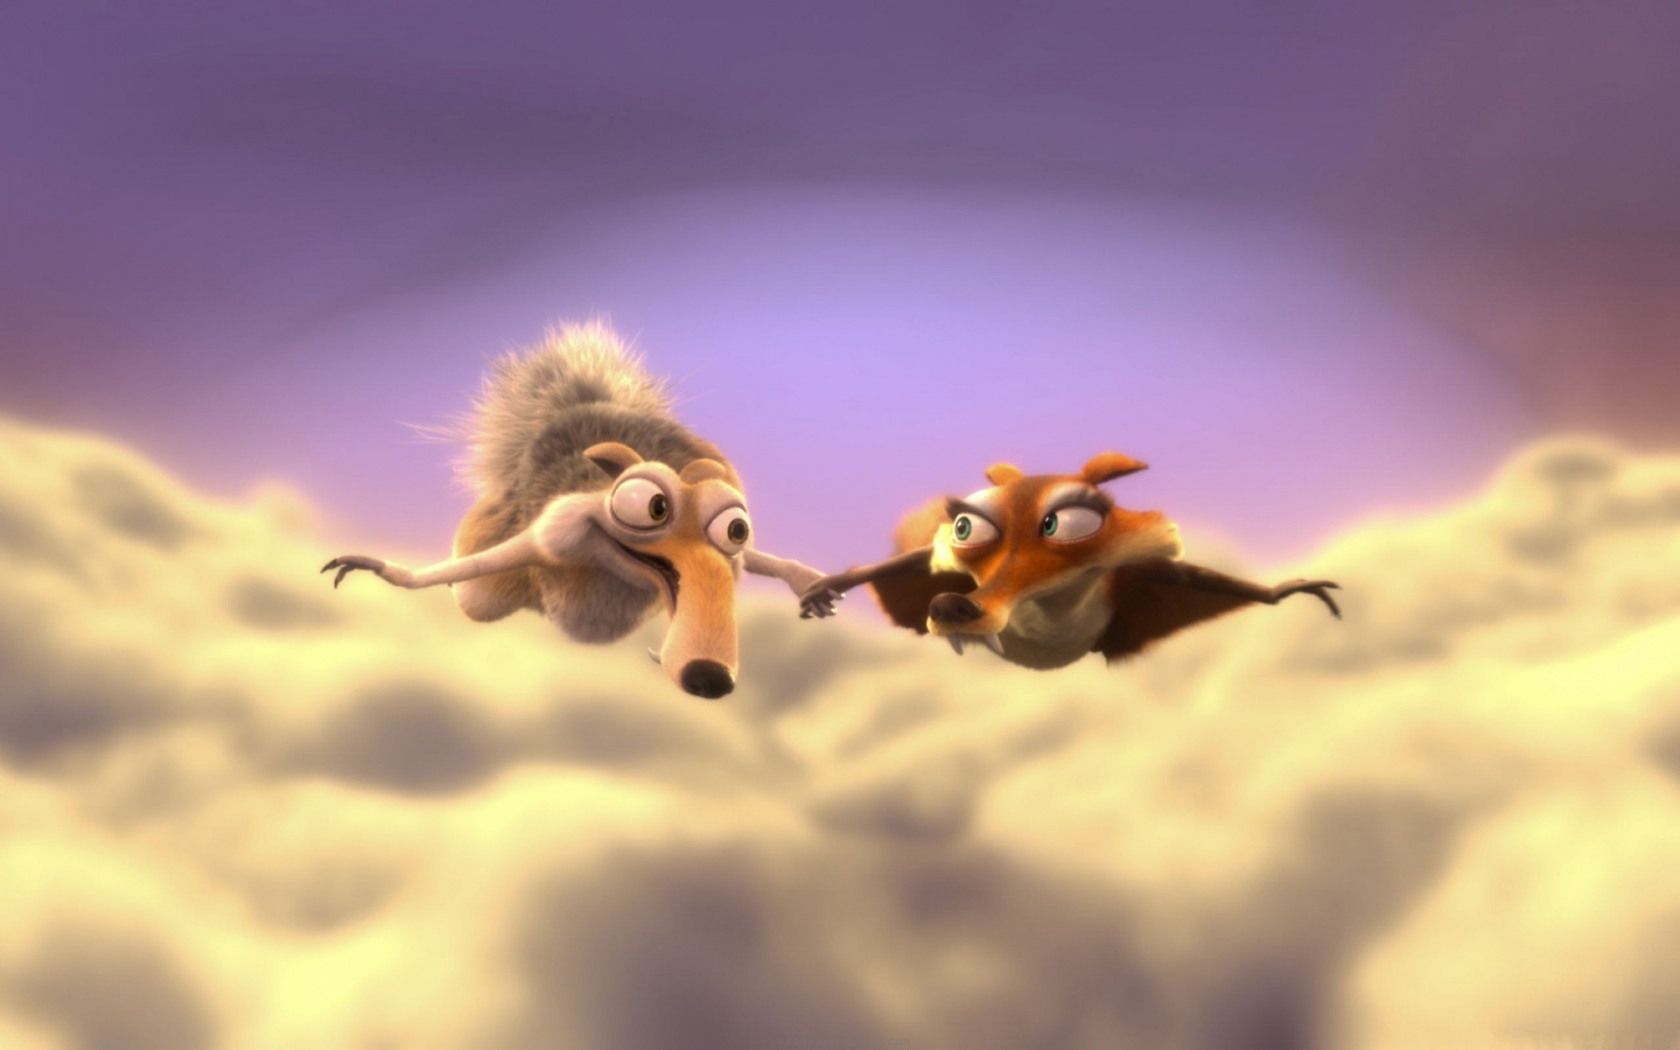 Scrat and Scratte for 1680 x 1050 widescreen resolution